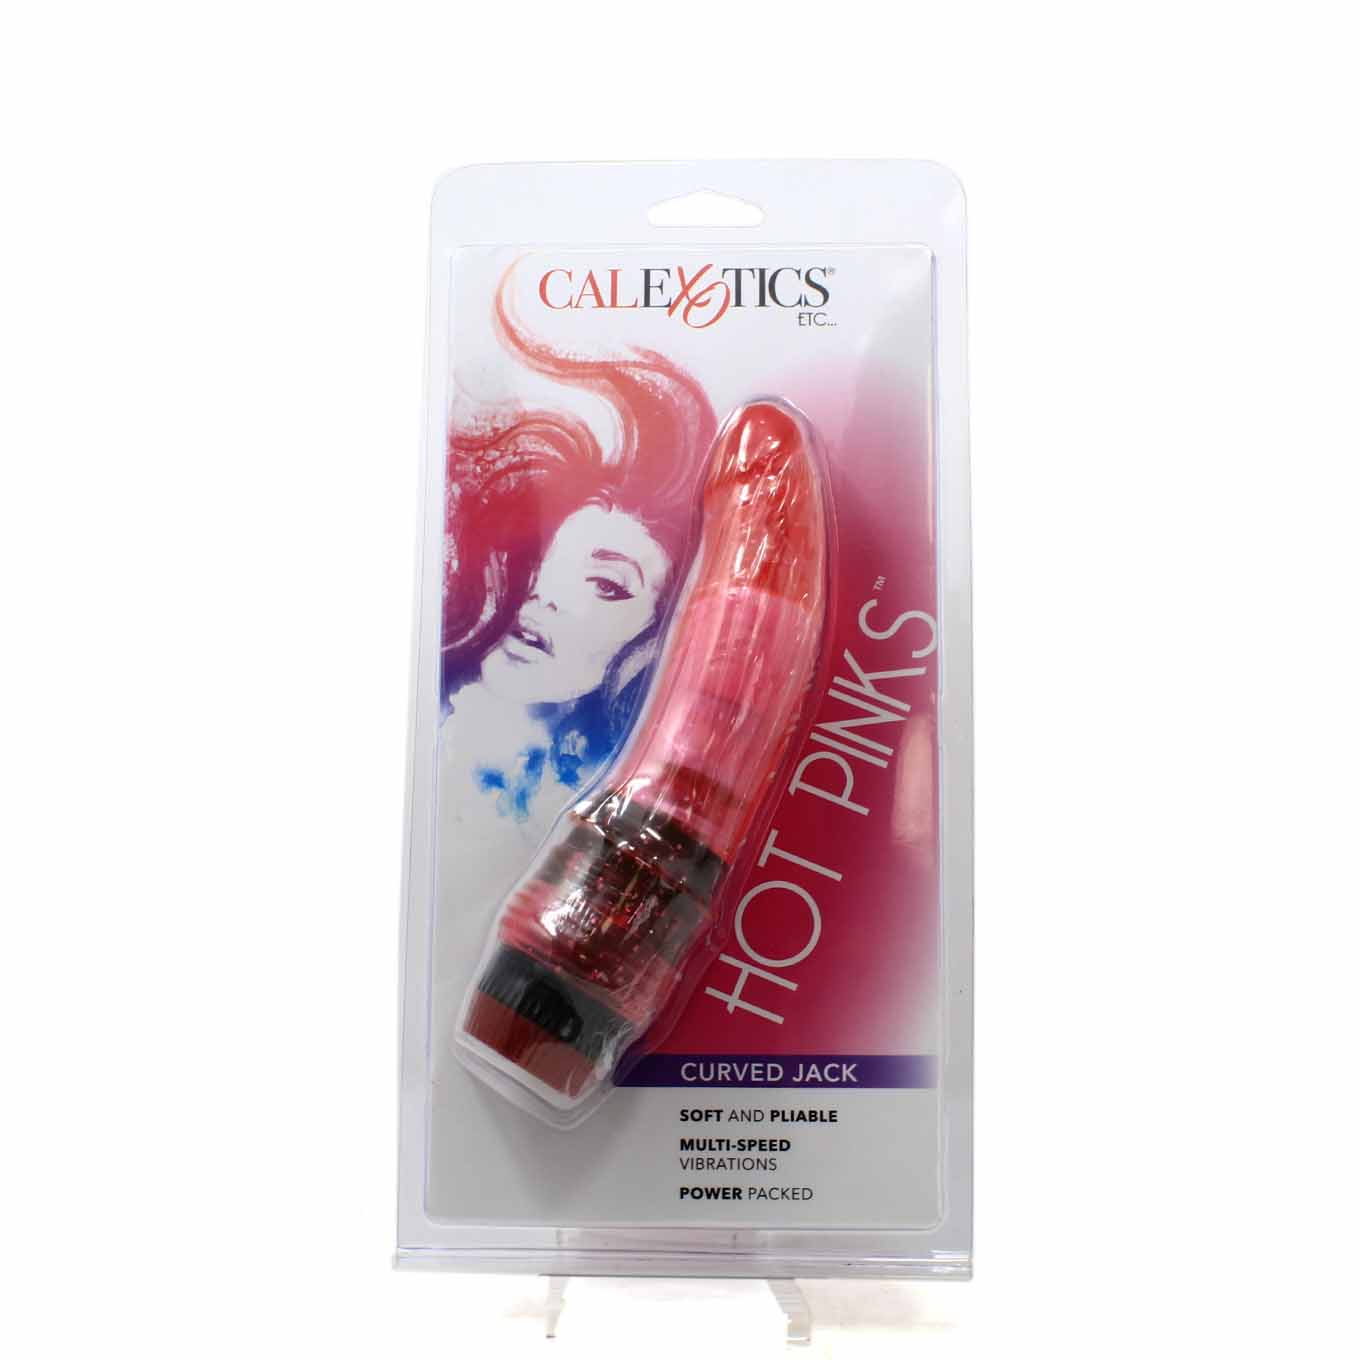 Curved 6.5 Inch Realistic Penis Vibrating Dildo